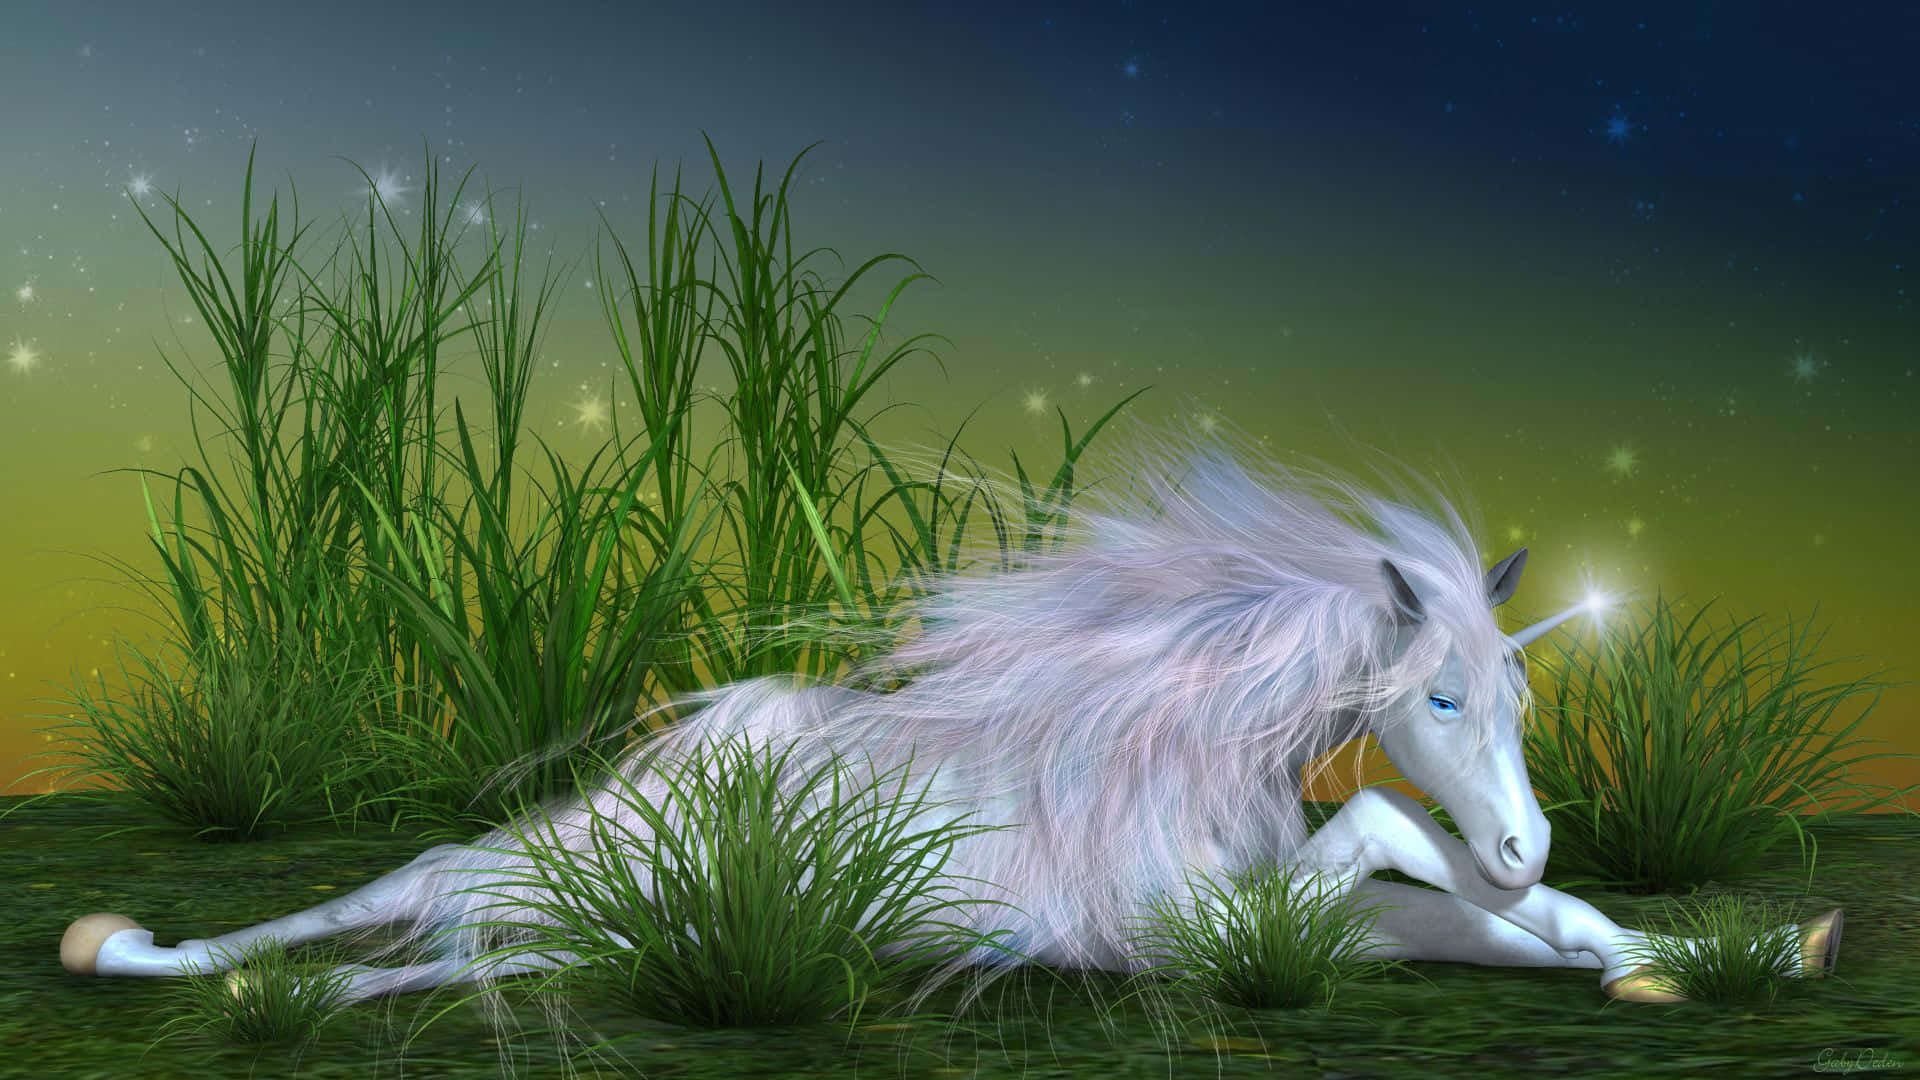 "Awaken your imagination with a real unicorn!" Wallpaper